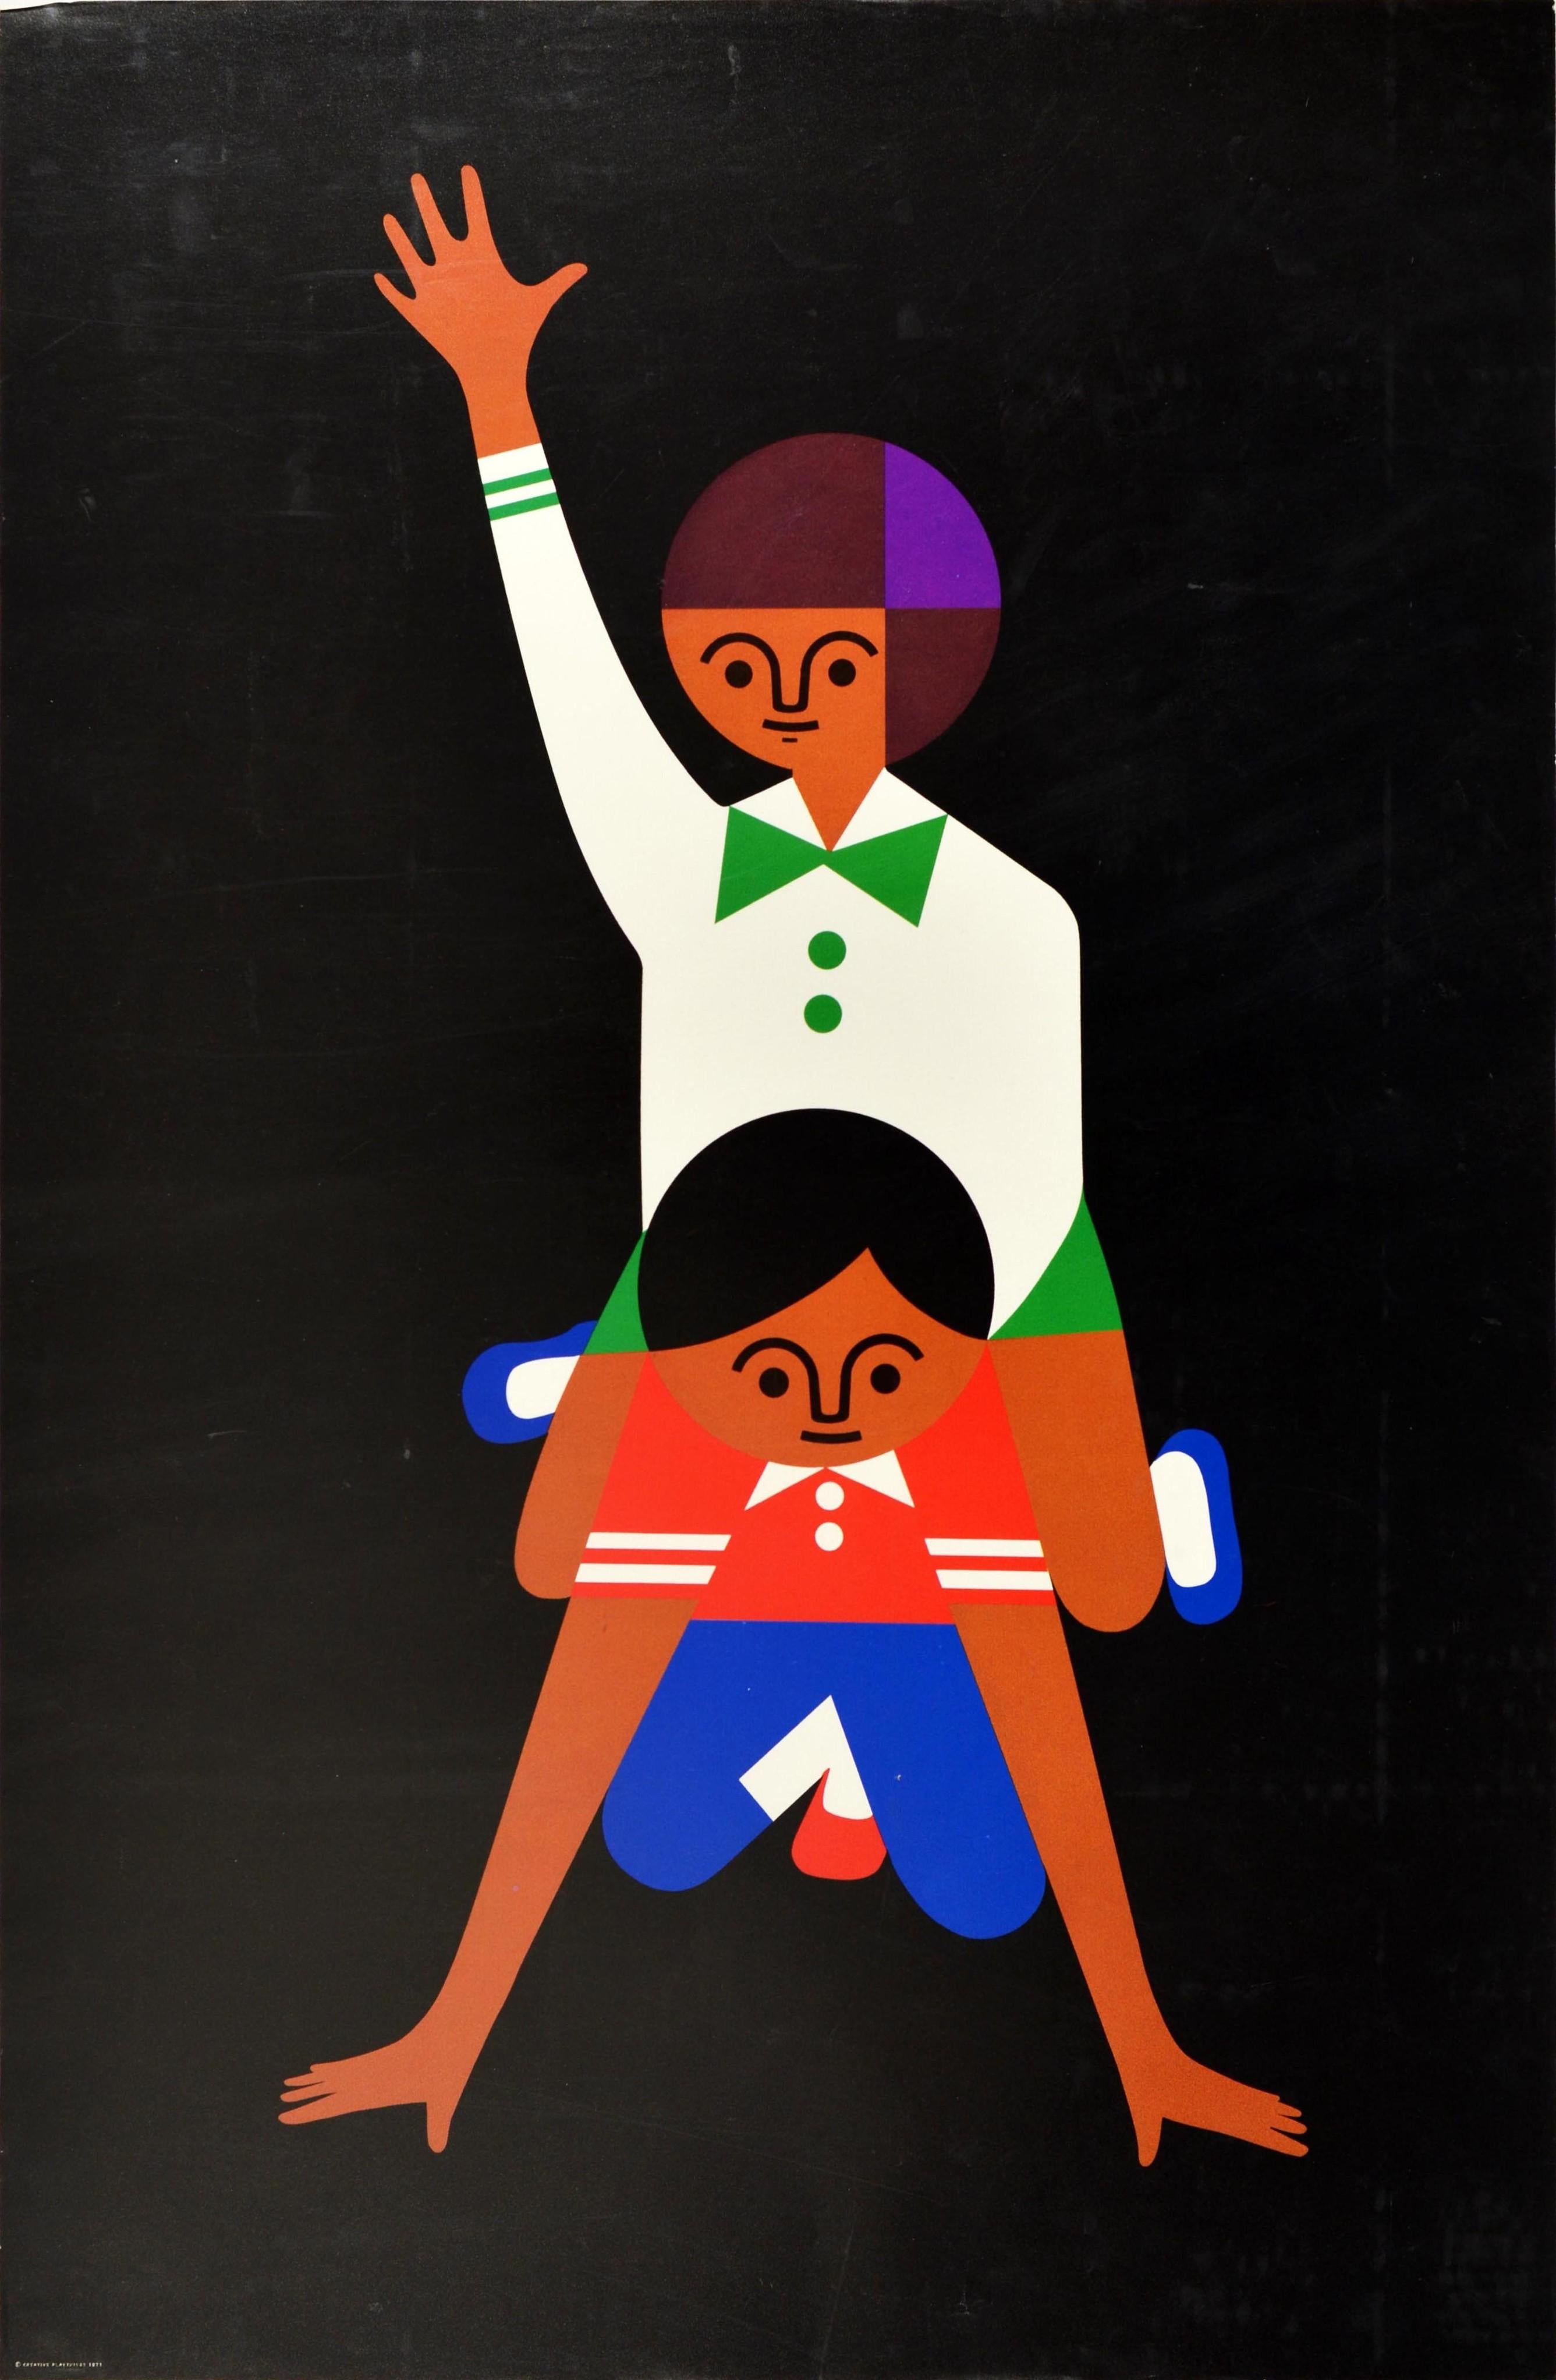 Original vintage advertising poster for the Creative Playthings educational toy shop in Manhattan New York featuring a fun and colourful graphic design by the South African toymaker and illustrator Fredun Shapur (b. 1929), showing two children